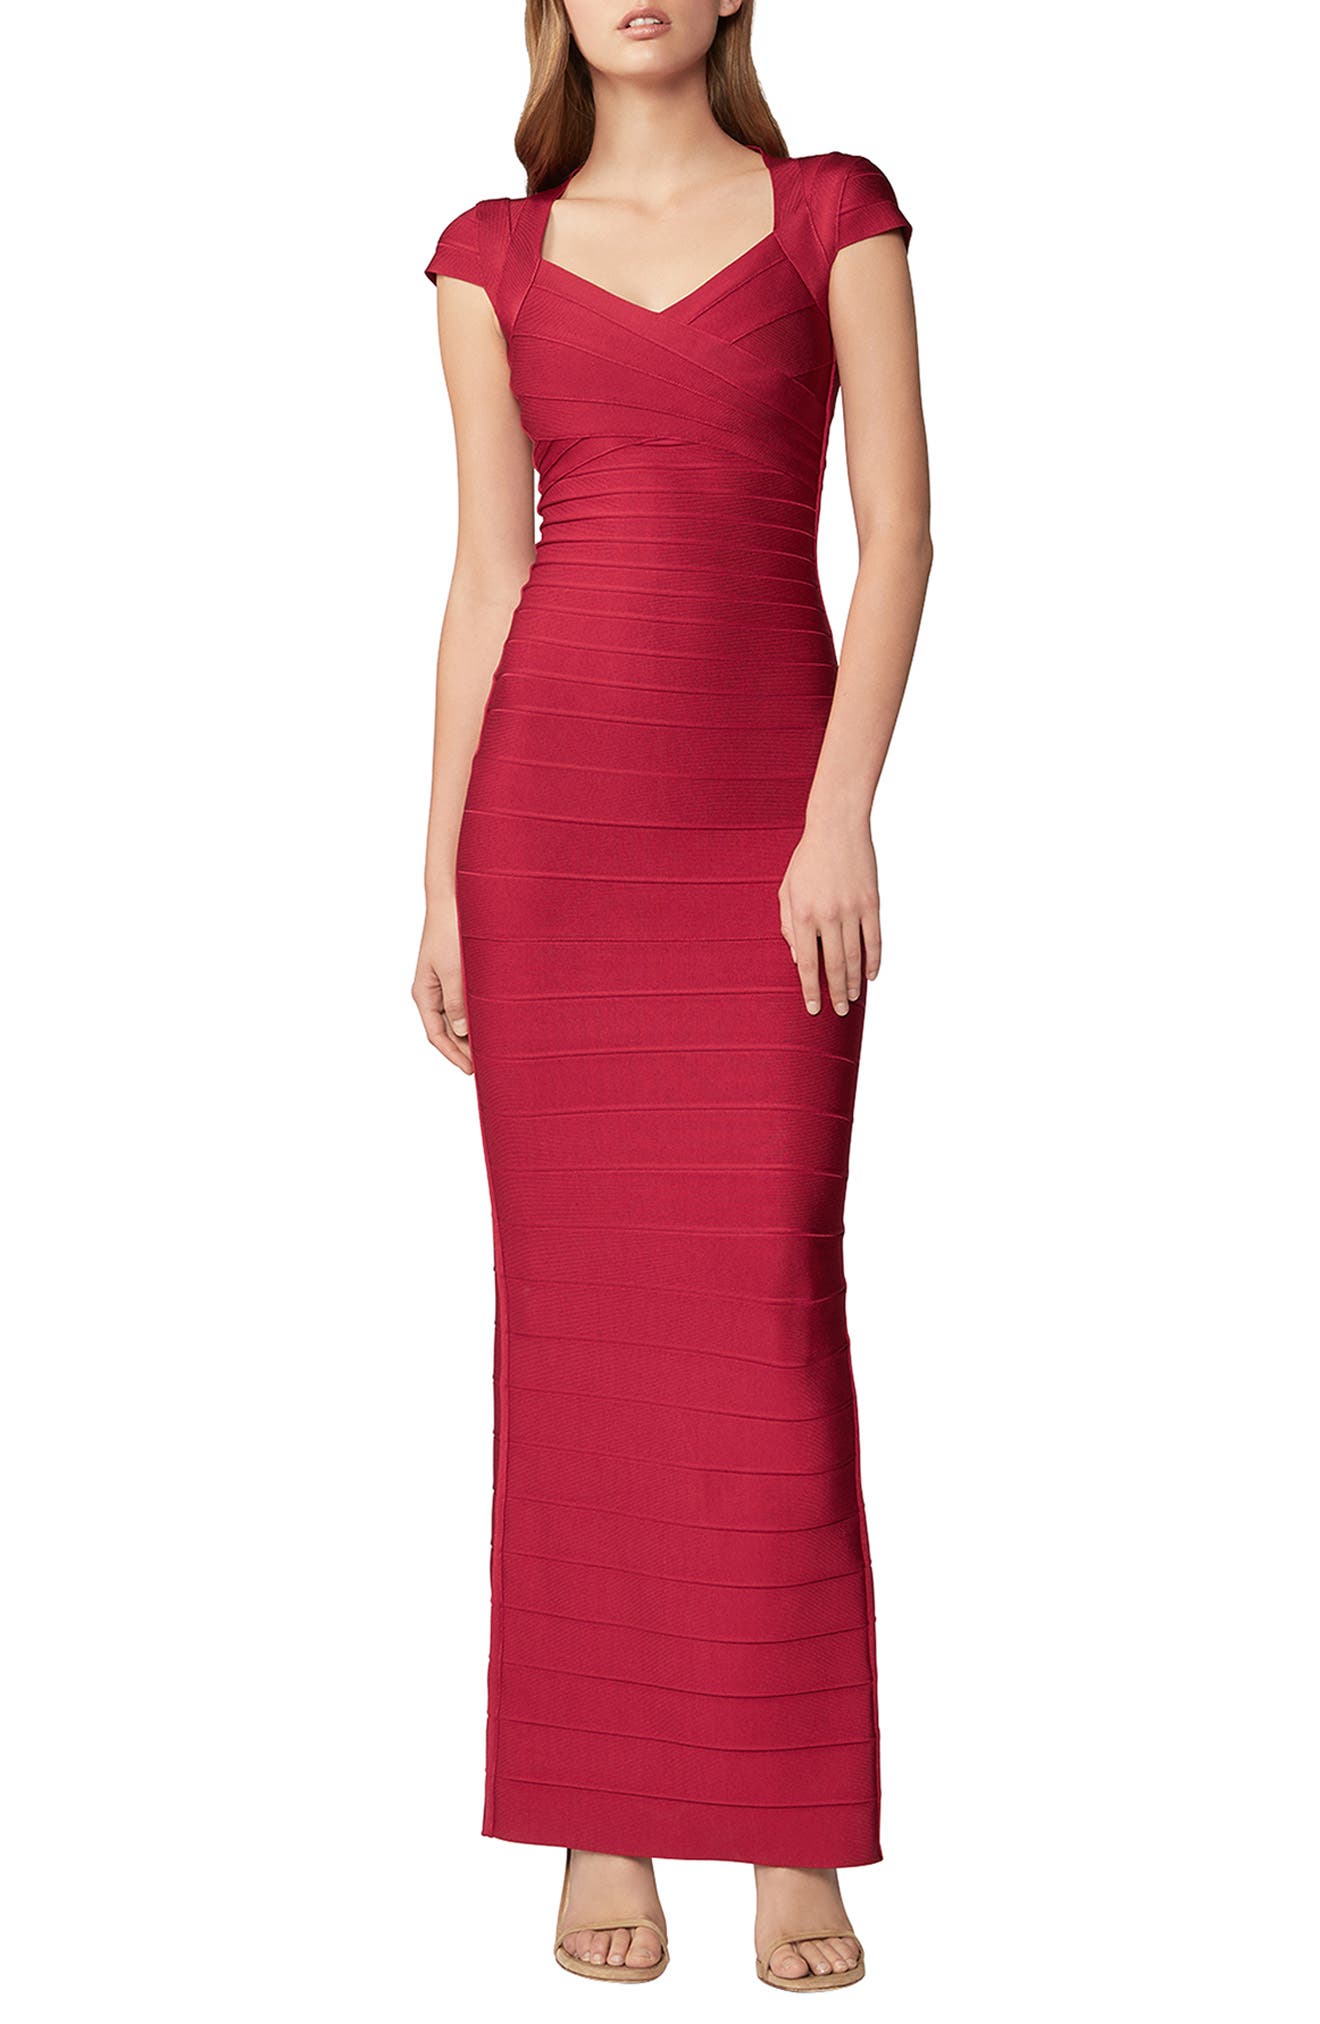 HERVE LEGER SWEETHEART NECK BANDAGE GOWN,613000748300